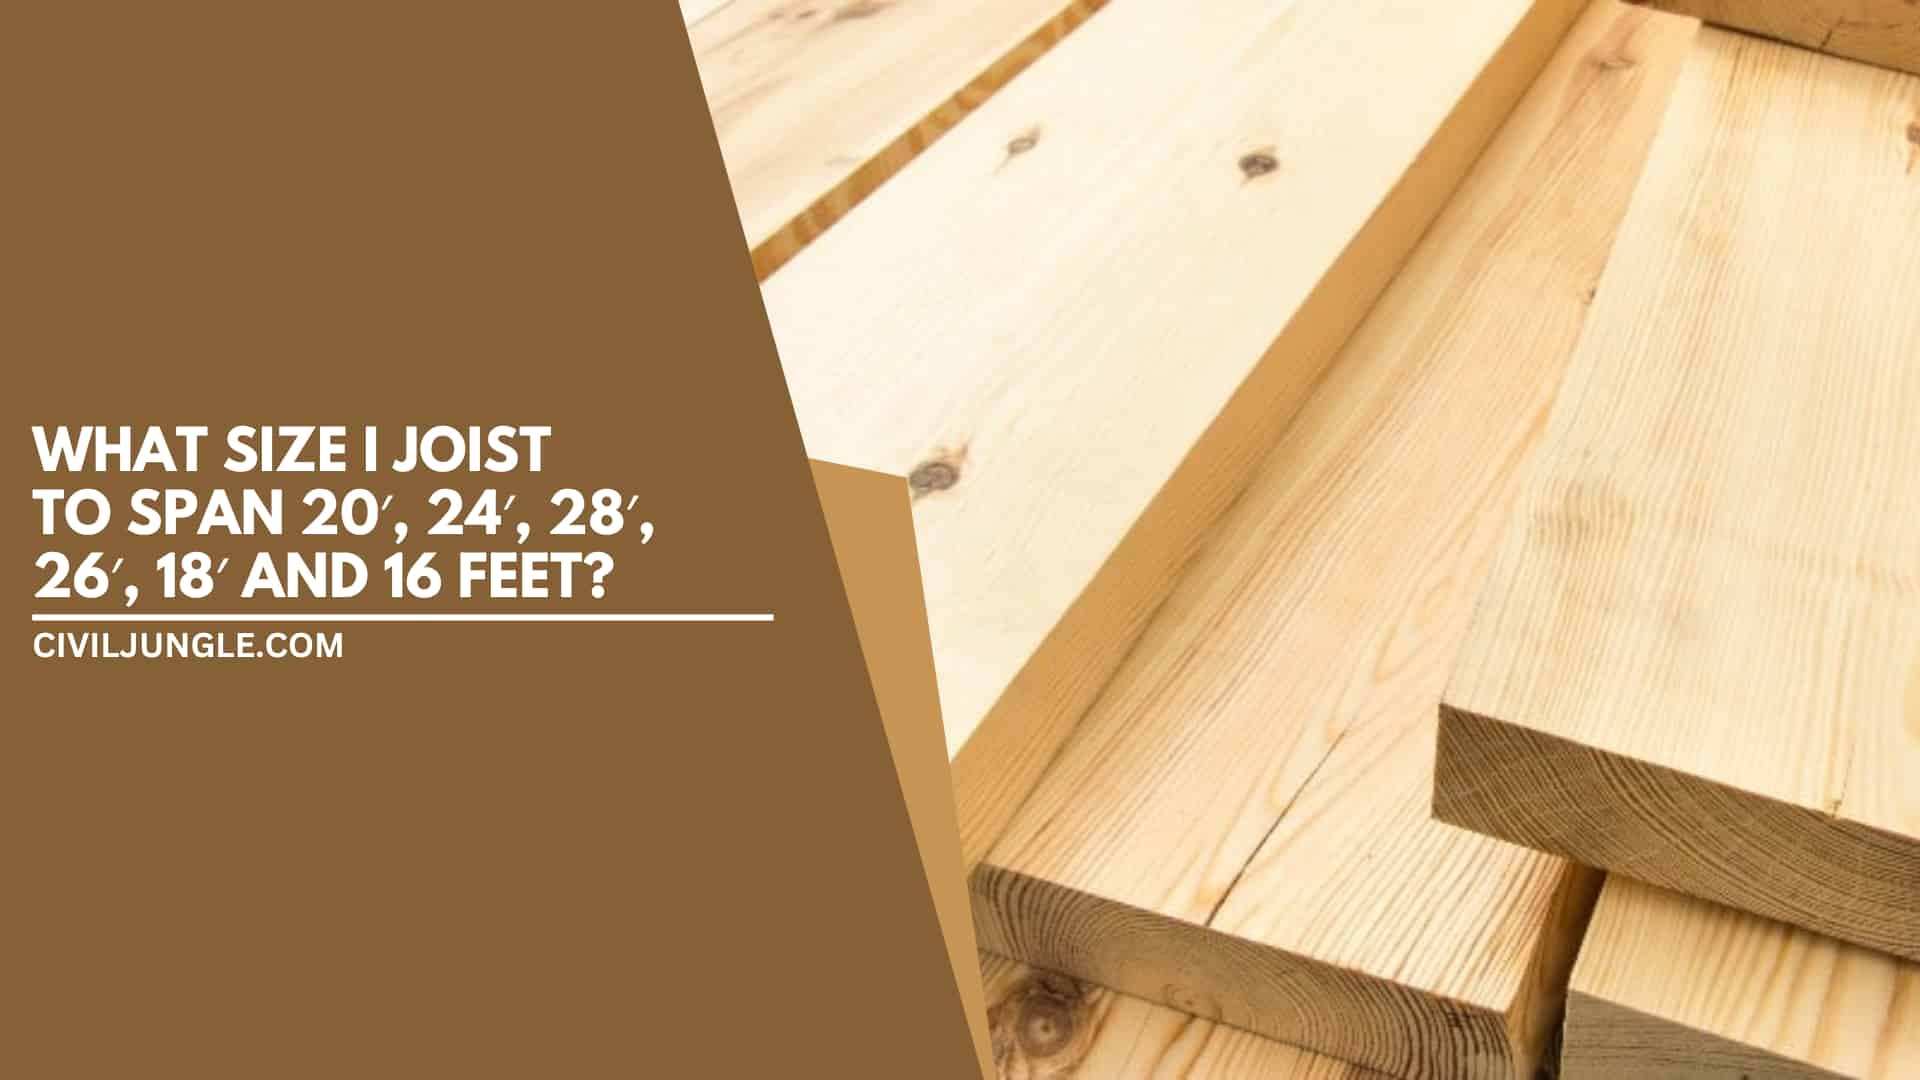 What Size I Joist to Span 20′, 24′, 28′, 26′, 18′ and 16 Feet?